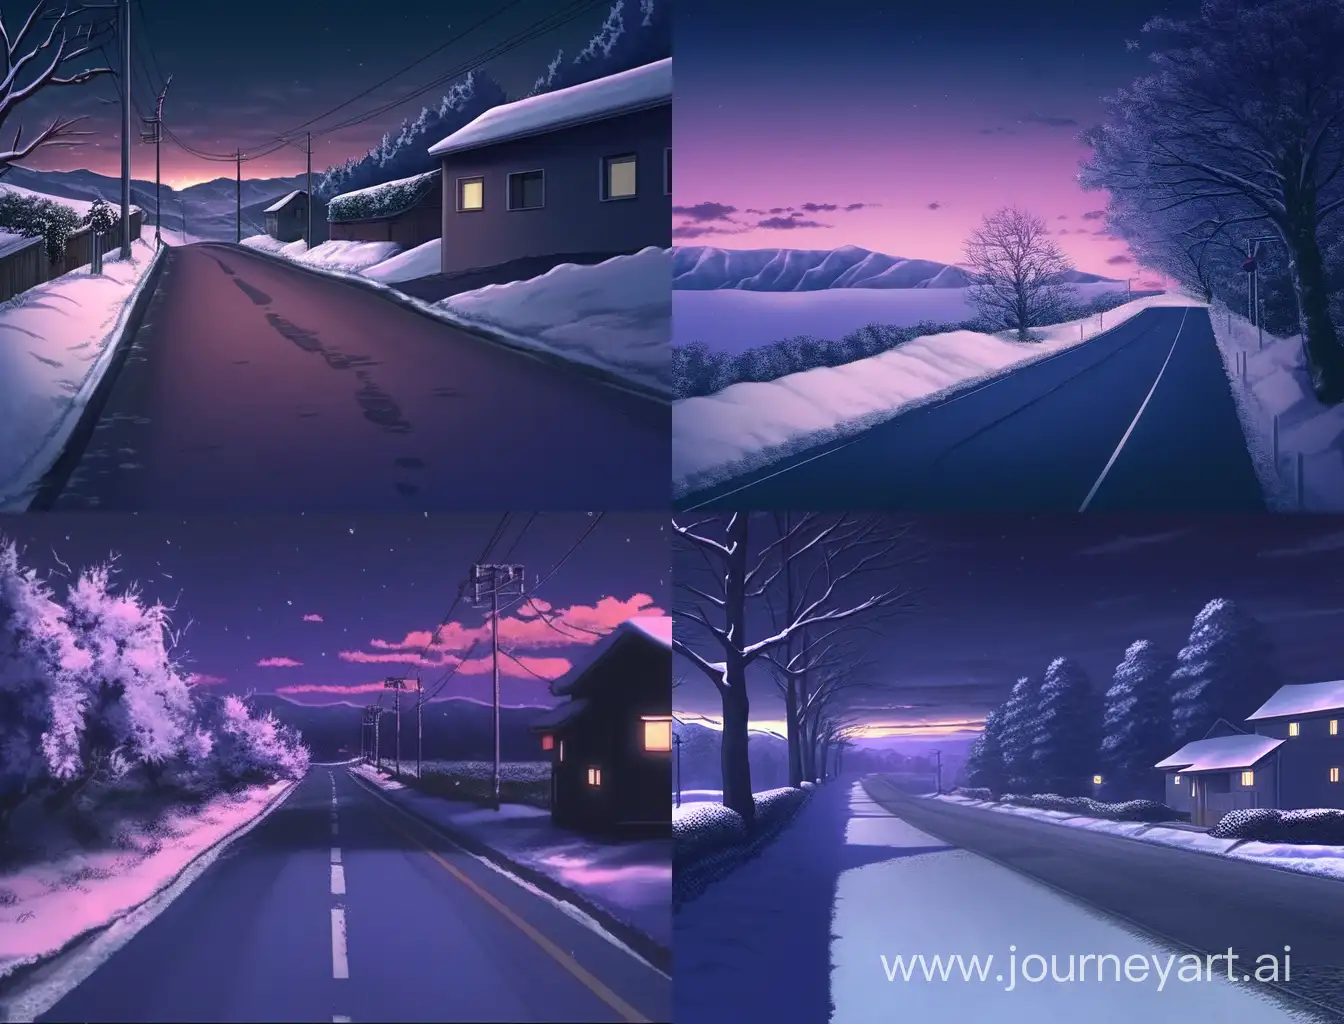 Lonely-Winter-Road-Desolate-Twilight-Scene-with-Snowy-Tree-and-House-Wall